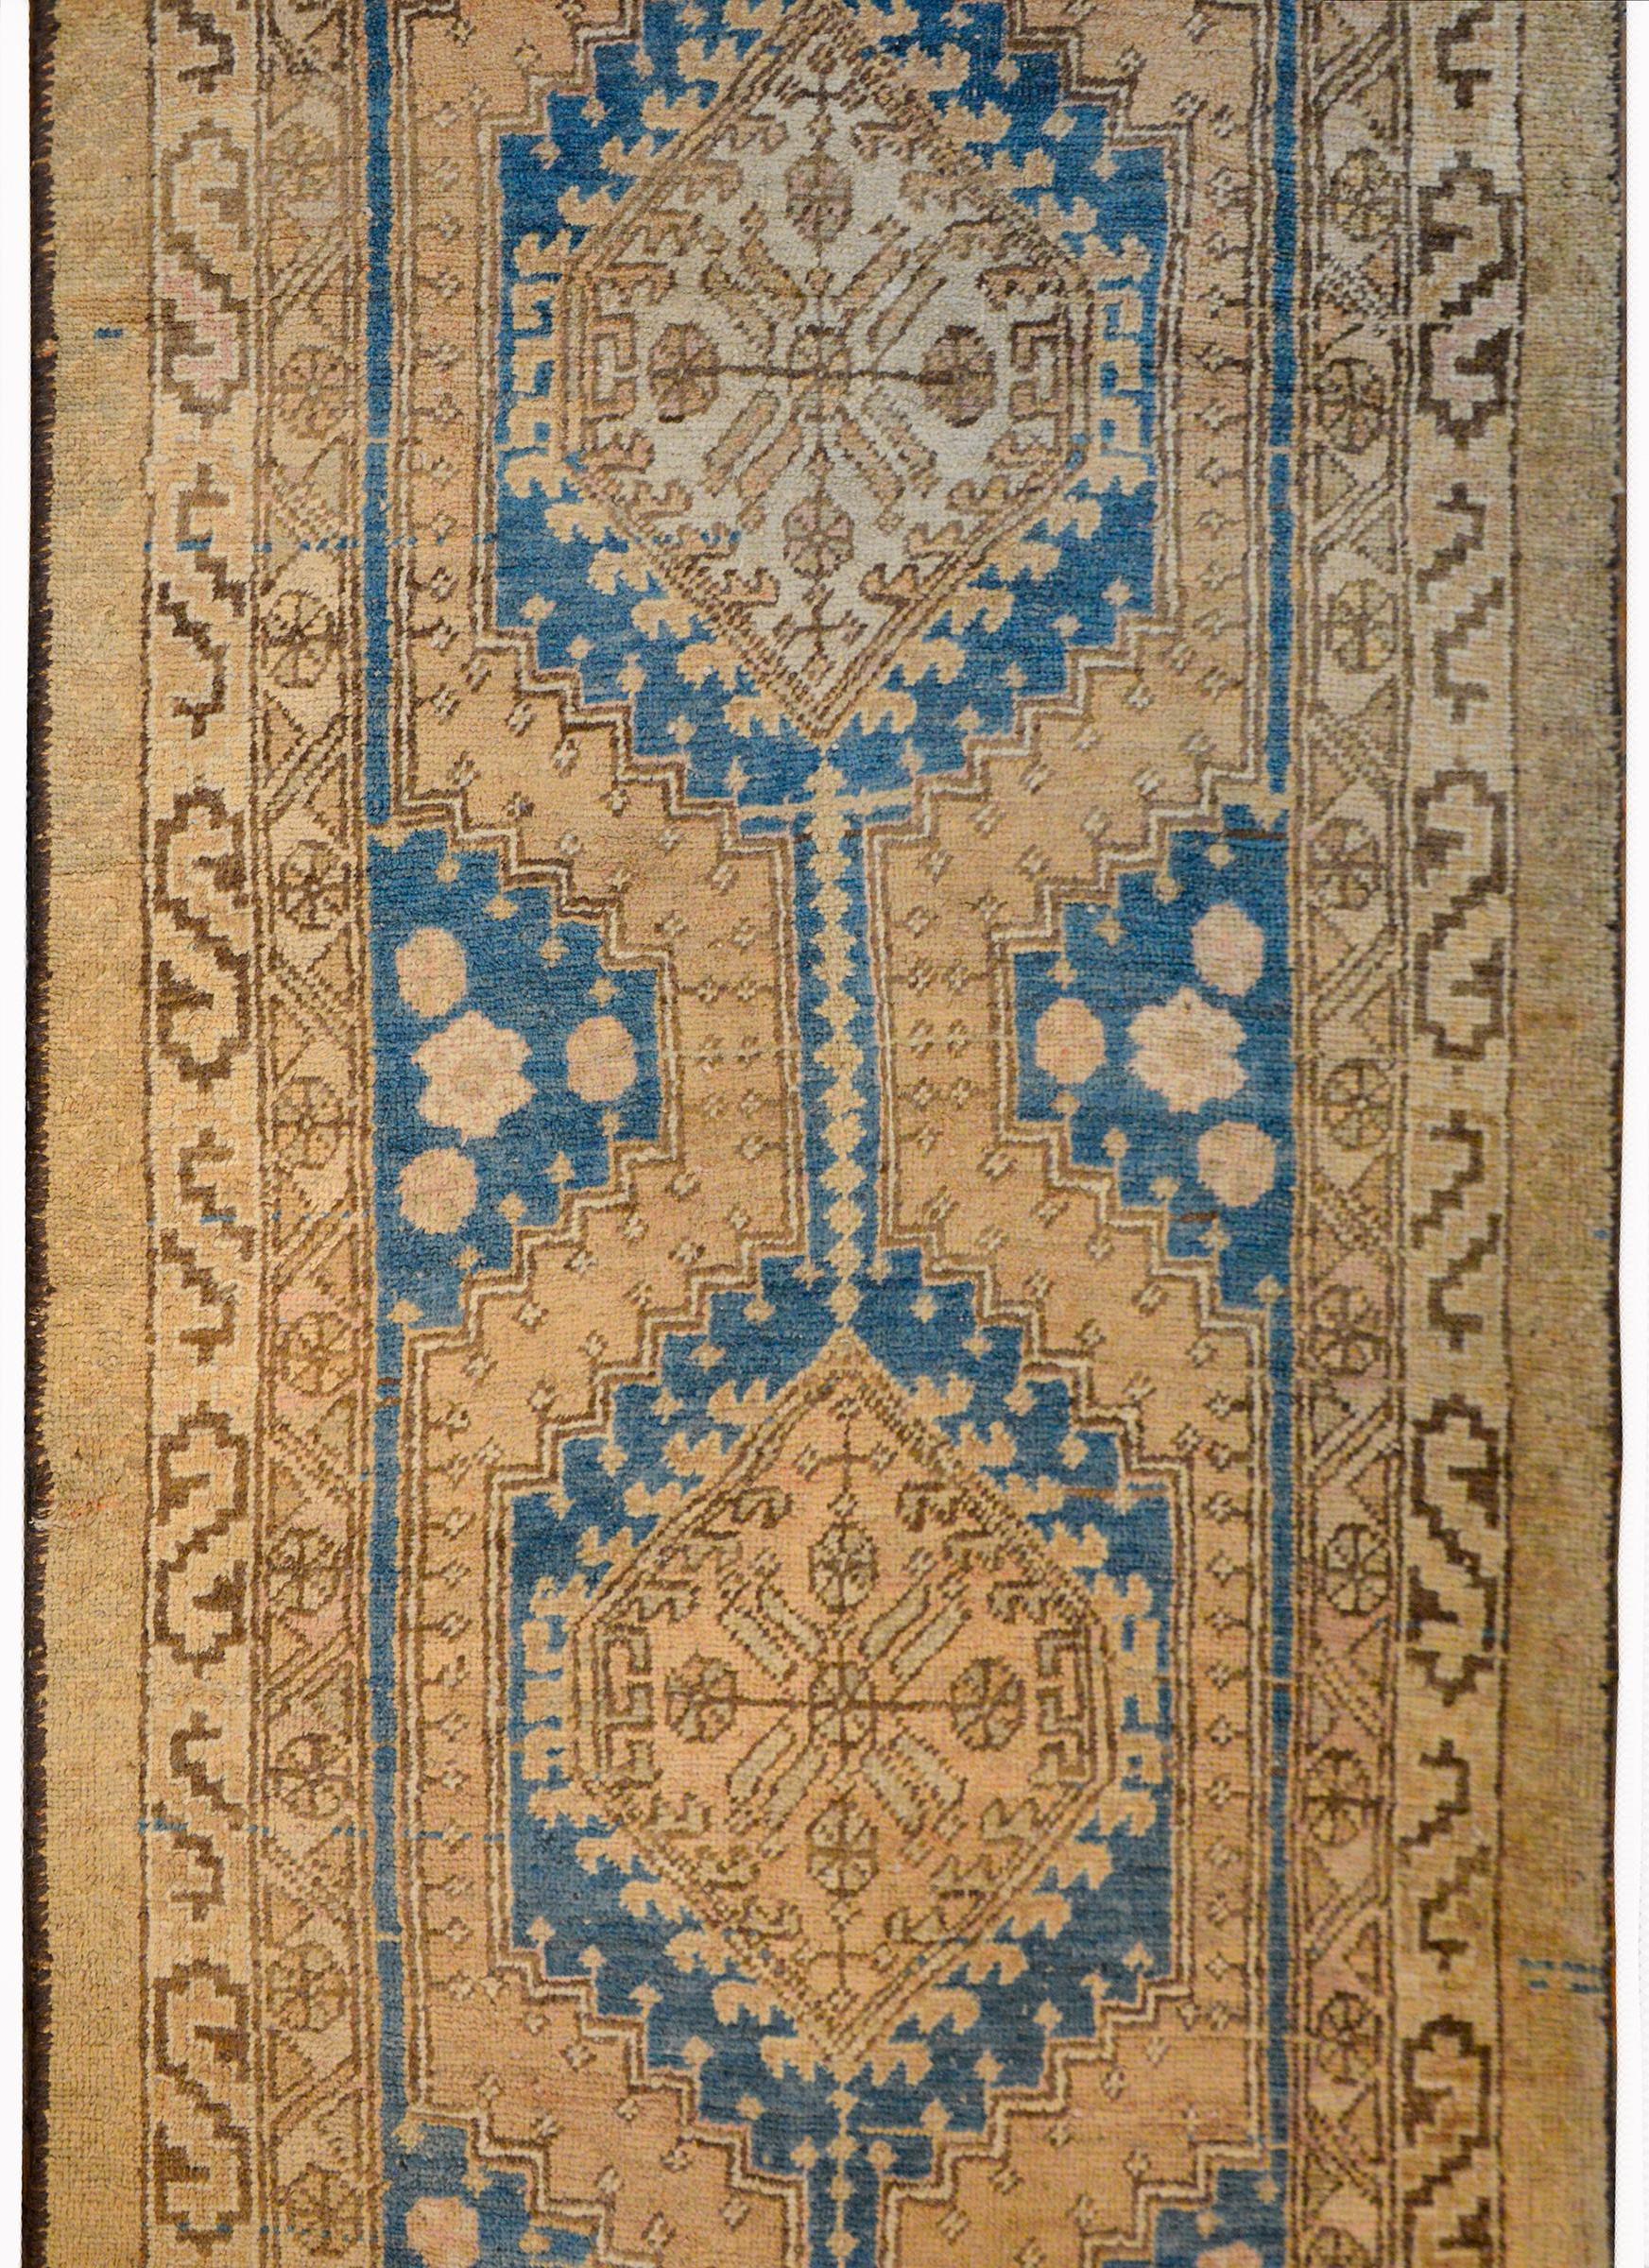 An incredible early 20th century NW Persian runner with multiple large-scale diamond medallions admits a field of stylized flowers and scrolling vines, against an Abrash indigo background turning into a natural camel colored background. The border